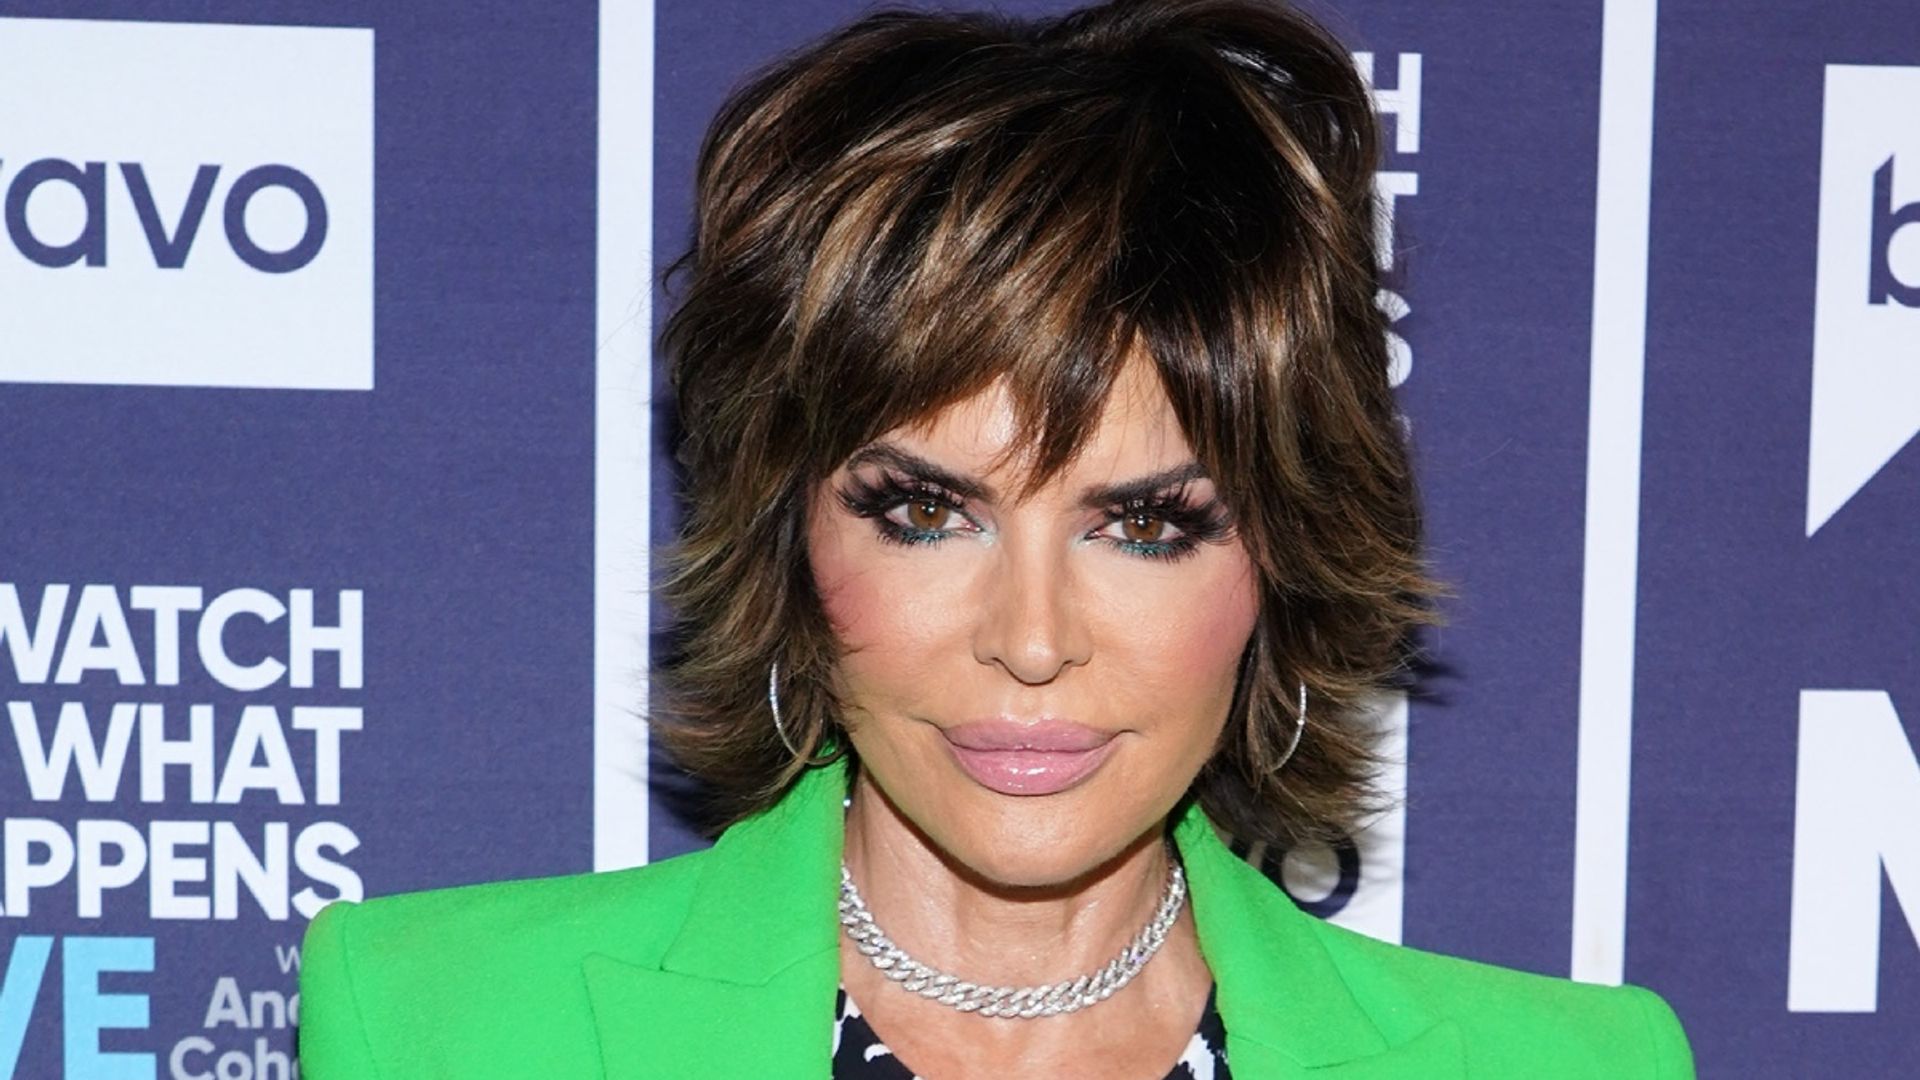 Lisa Rinna looks unbelievable in a wedding gown in epic throwback